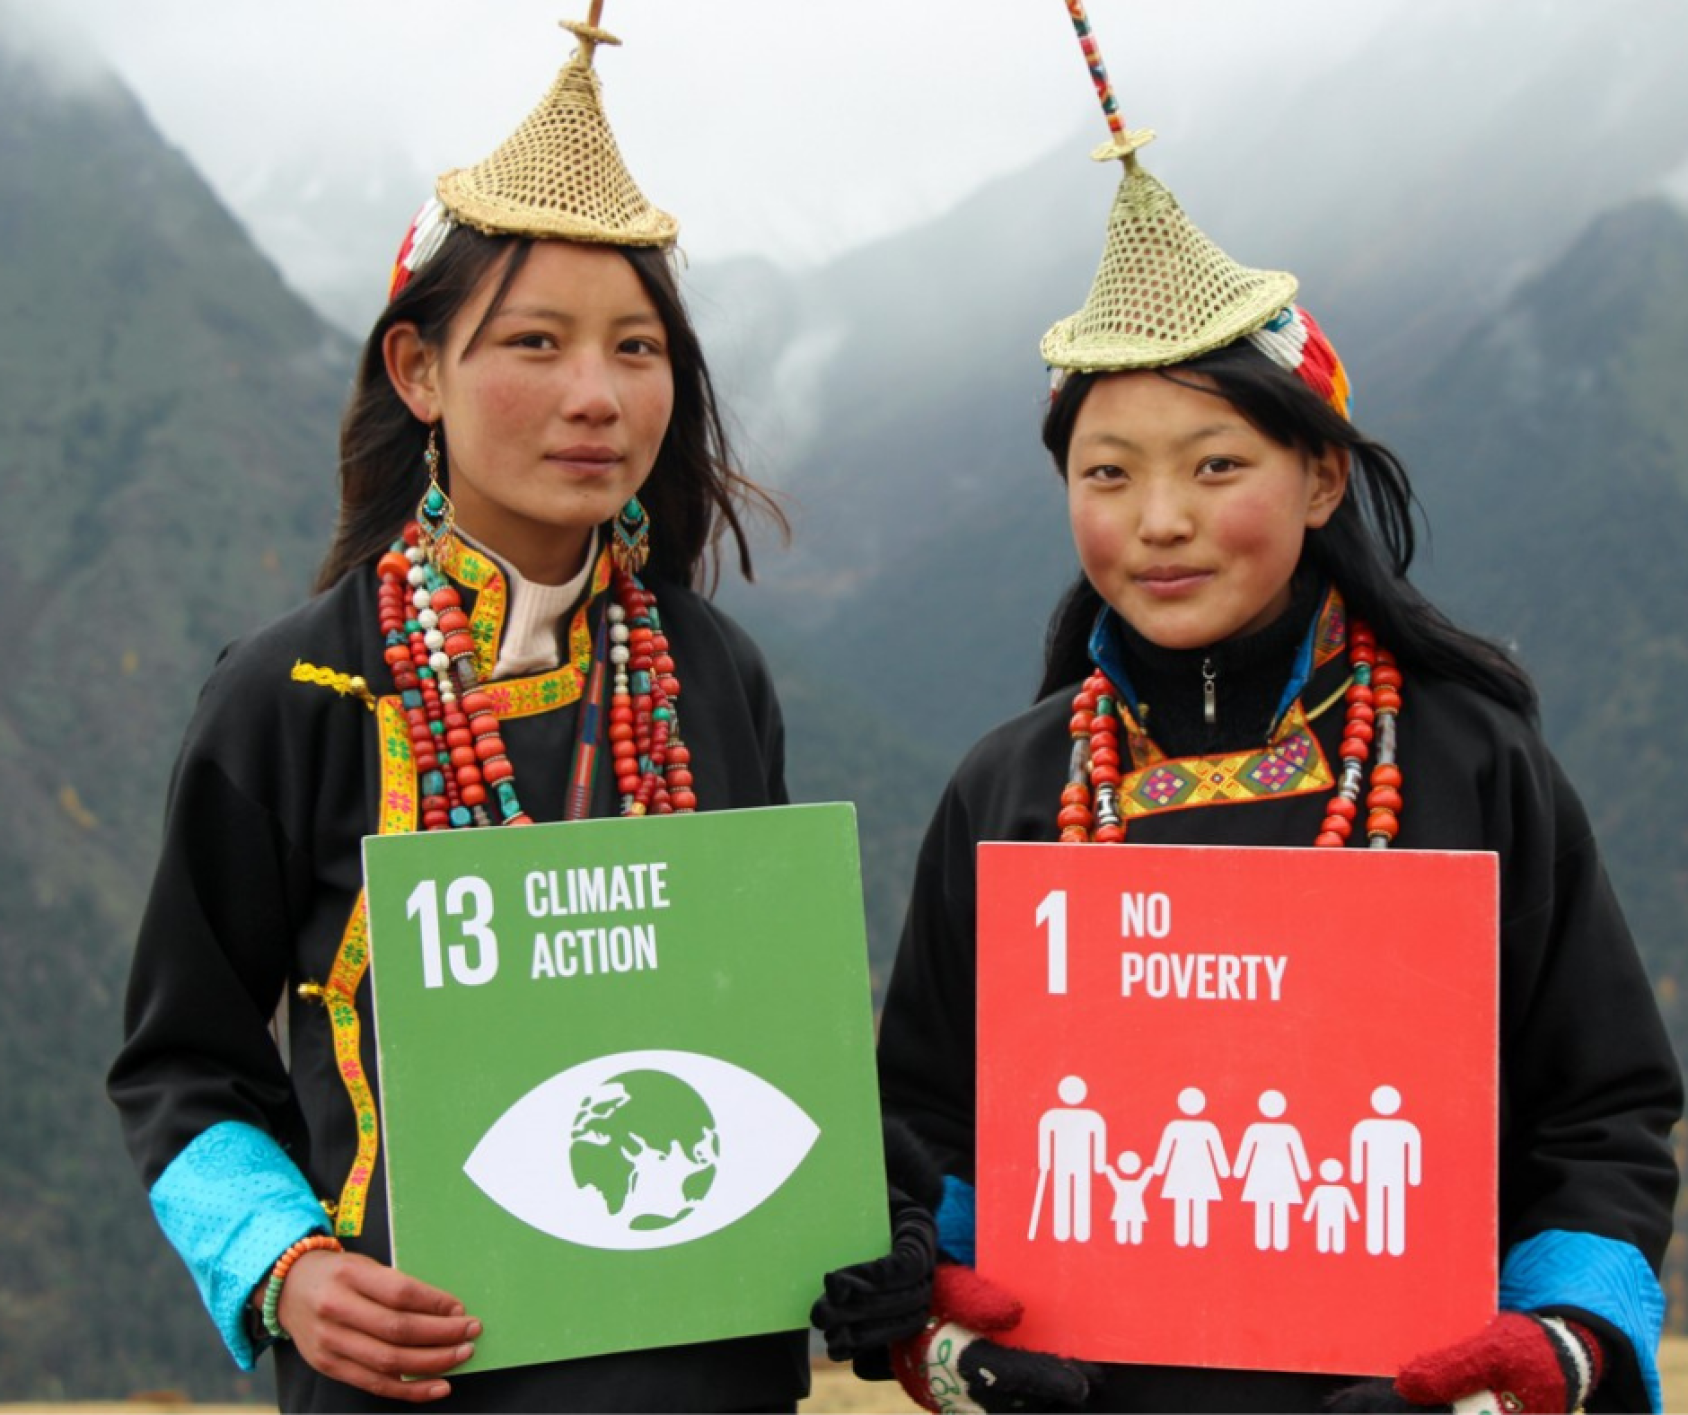 2 Bhutanese girls holding SDG signs in the mountains